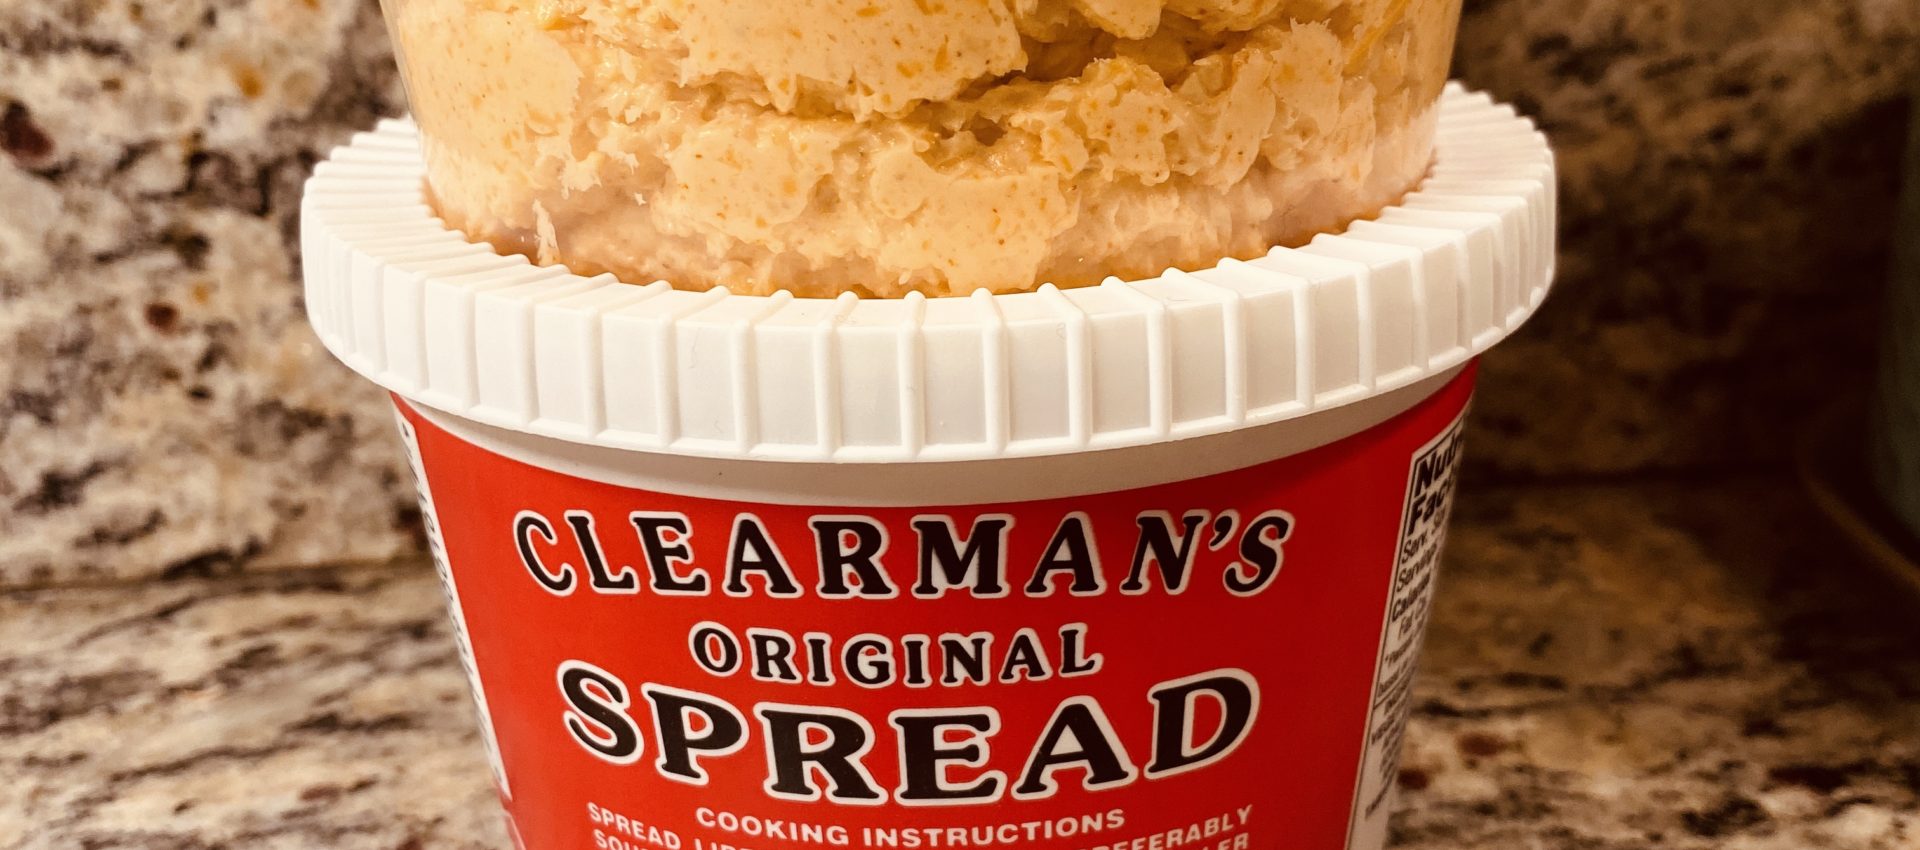 Clearman’s Cheese Spread Blythes Blog